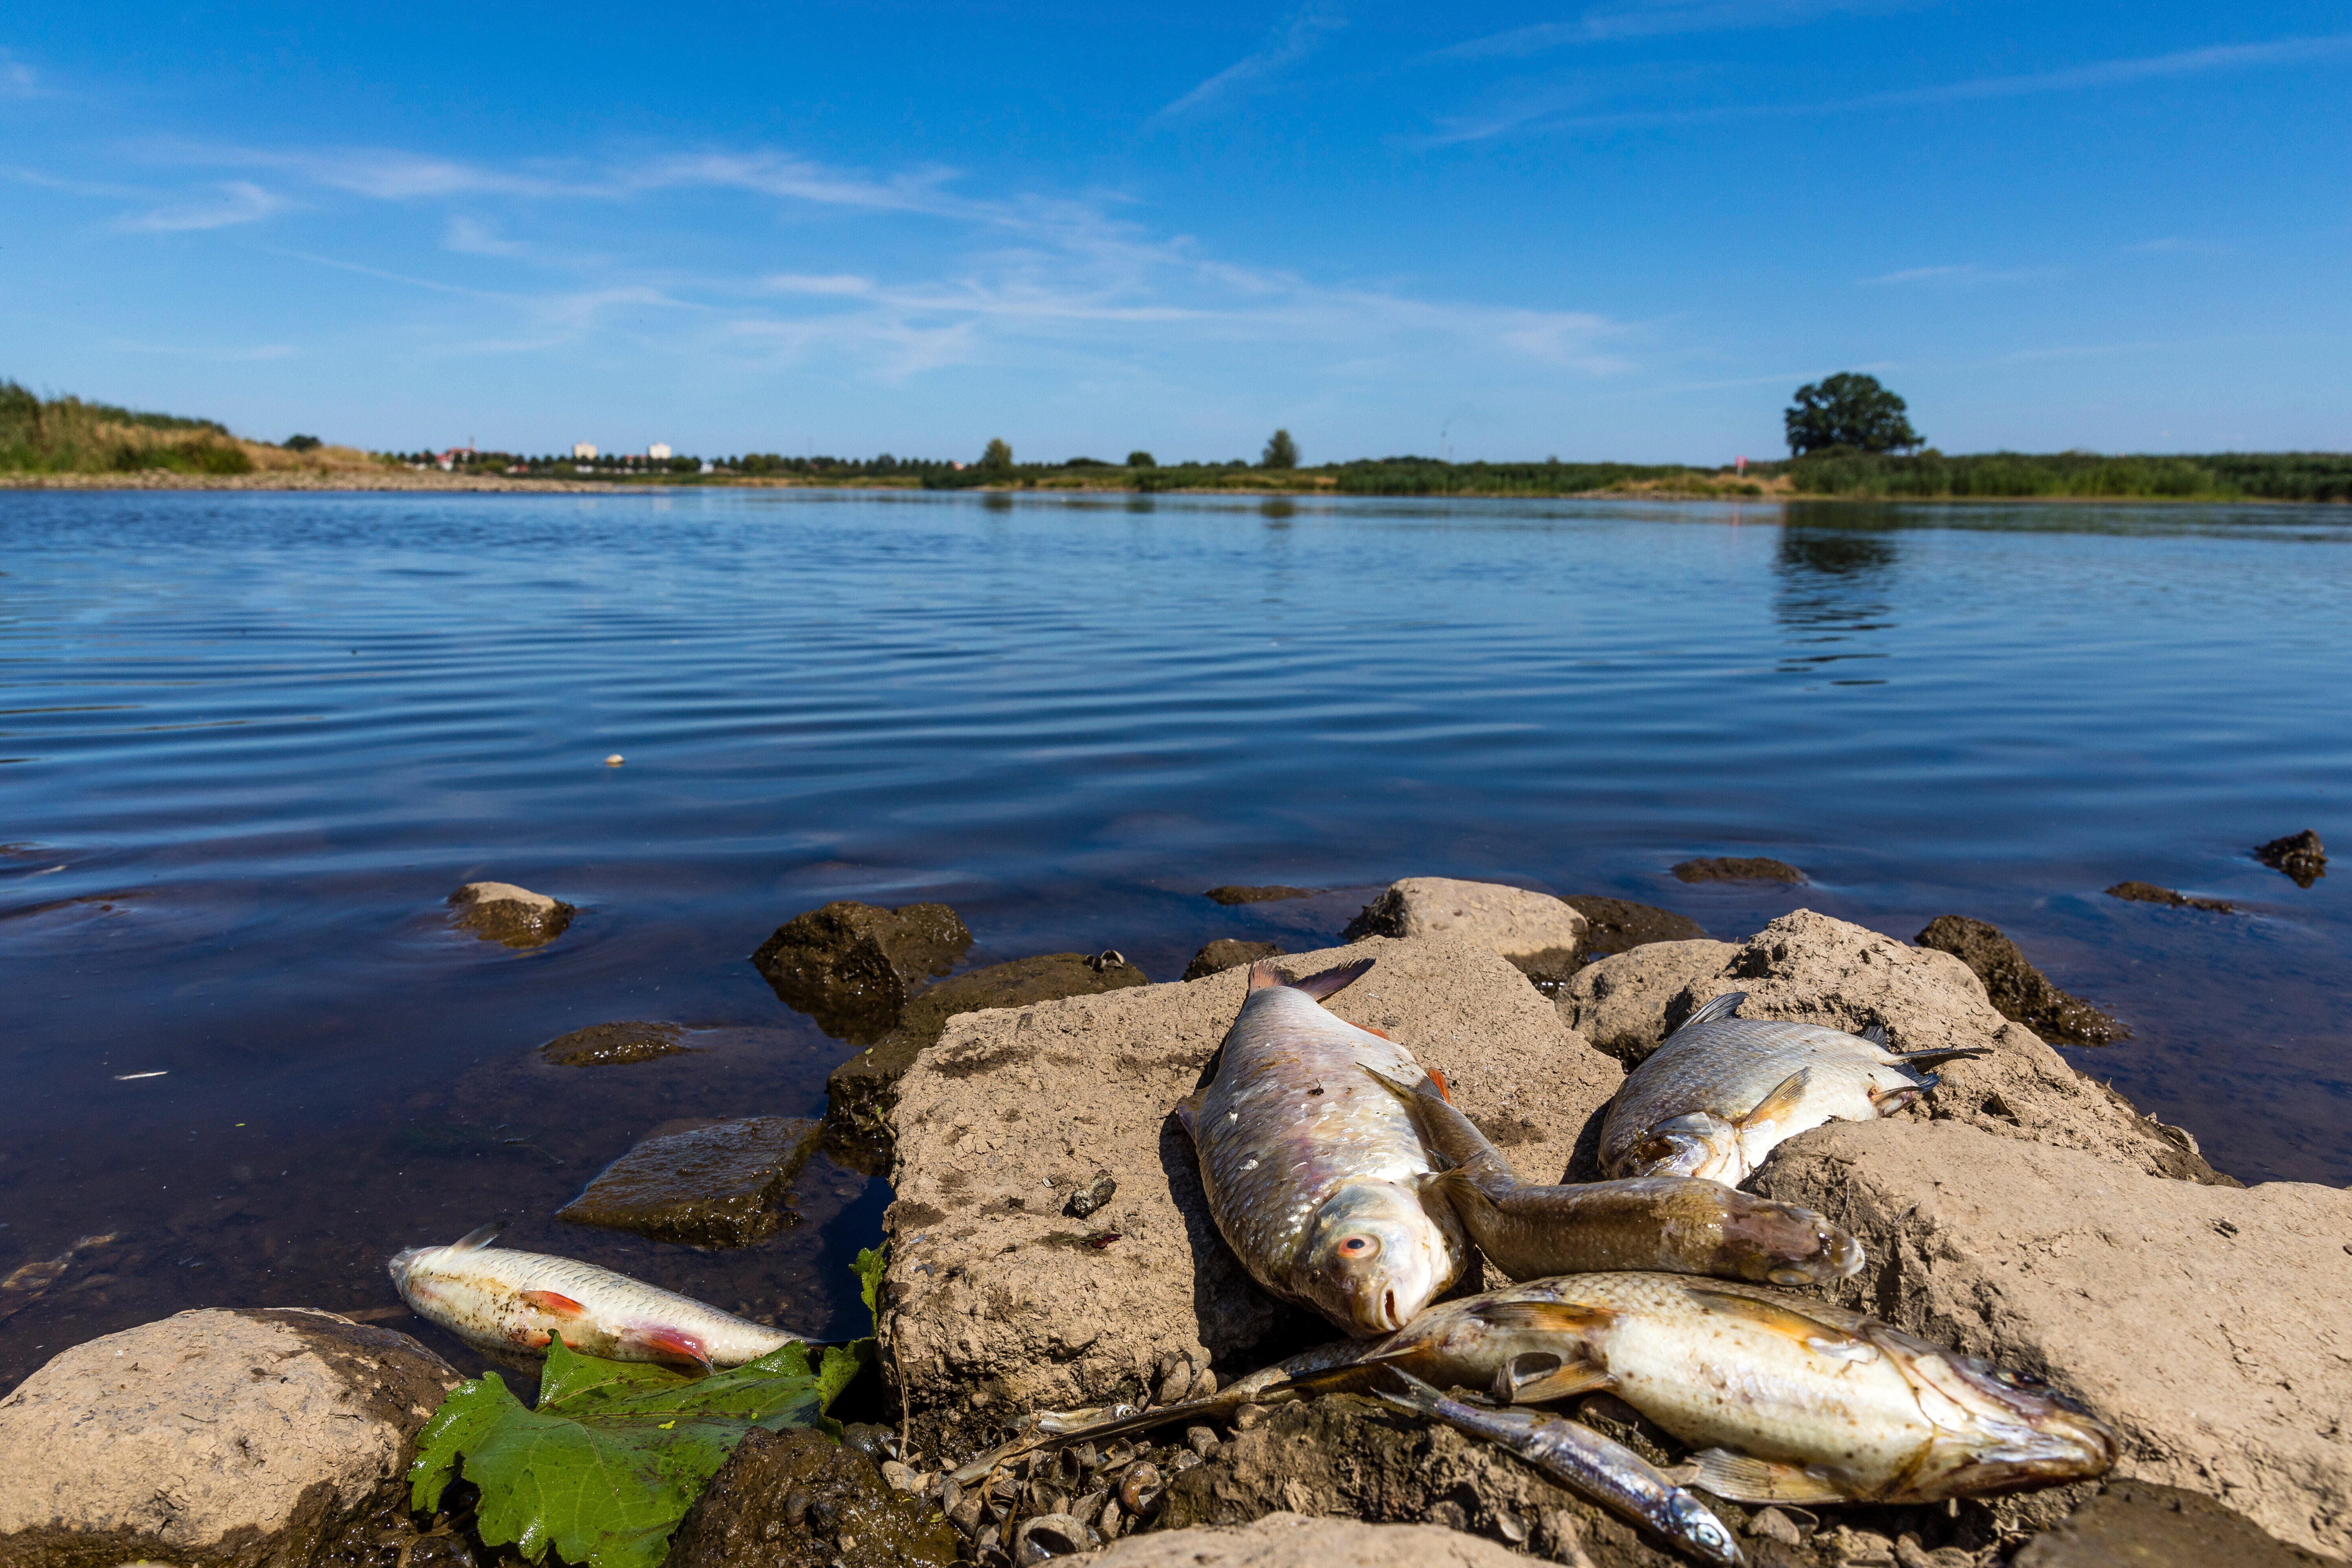 ‘Unknown, Highly Toxic Substance’ Seems to Be Killing Tons of Fish in a European River